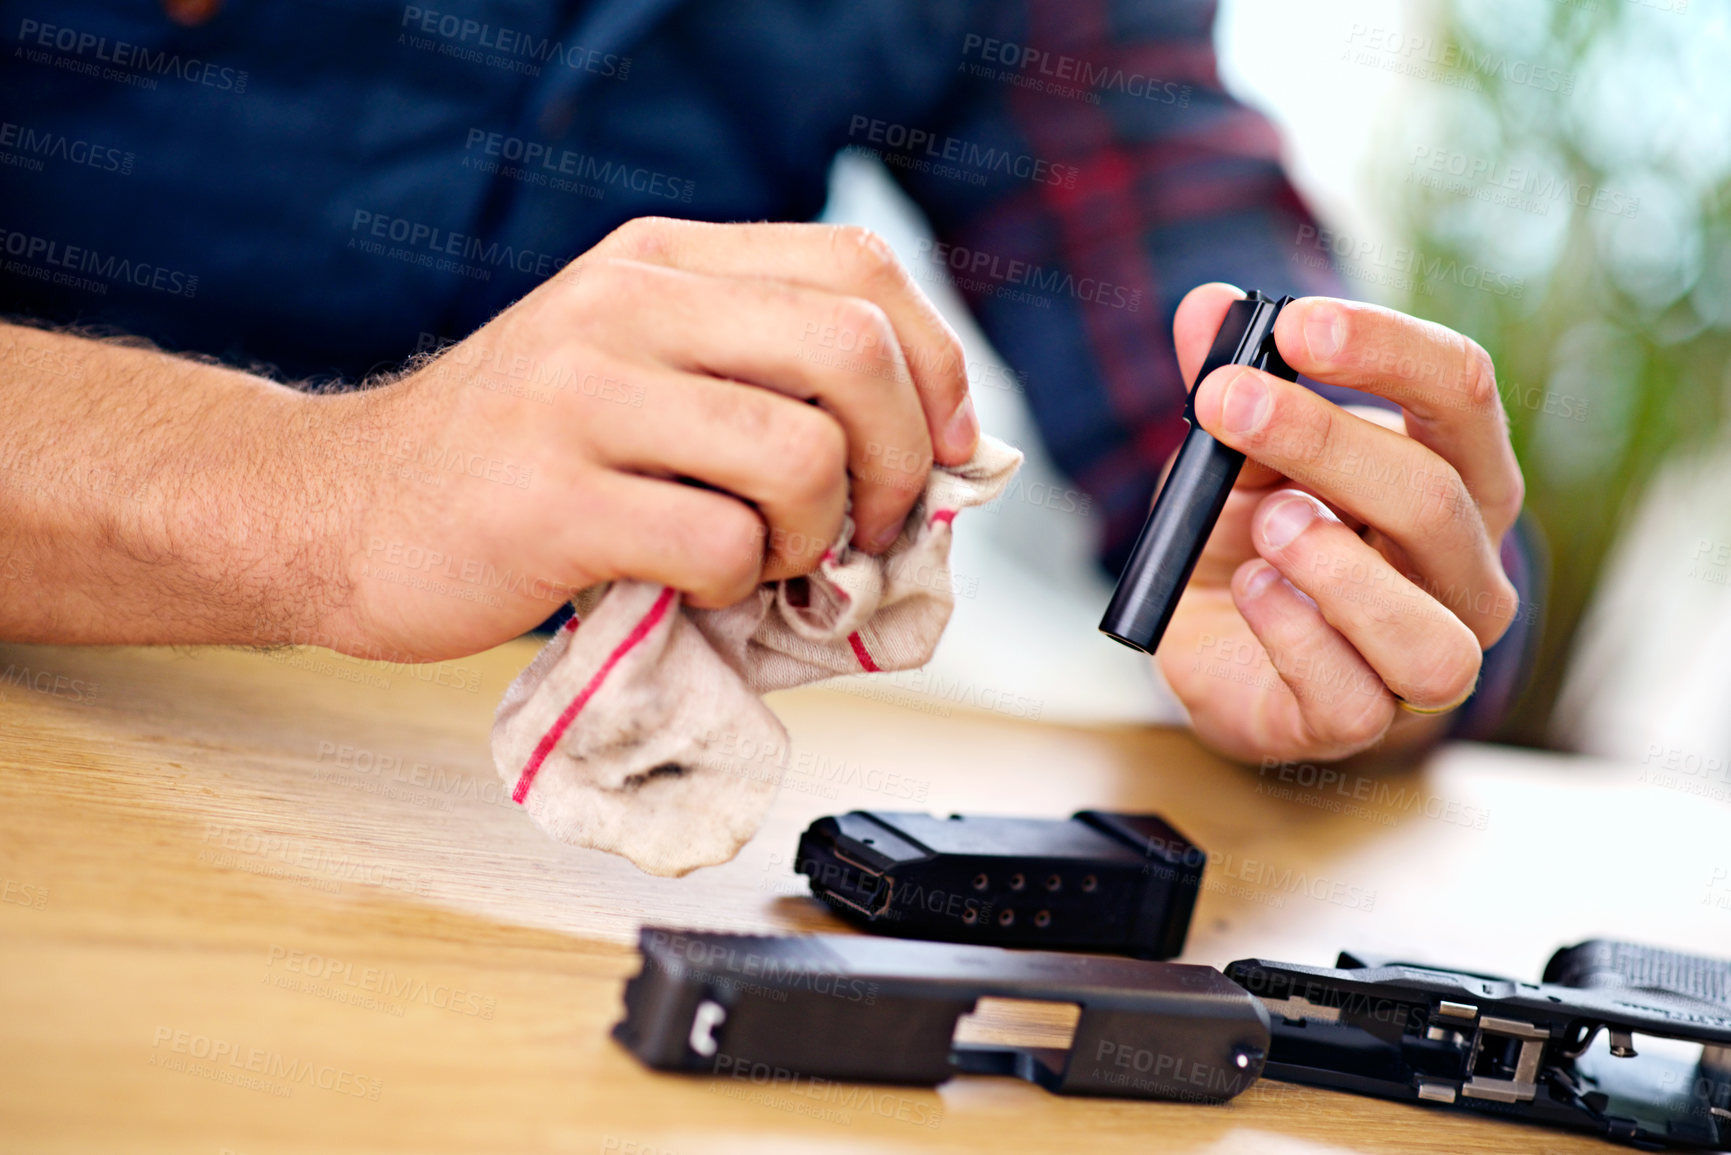 Buy stock photo Hands, cleaning and man with gun at table for safety, self defense and handgun assembly. Process, equipment and person with firearm maintenance with cloth, magazine and wiping dust, dirt and oil